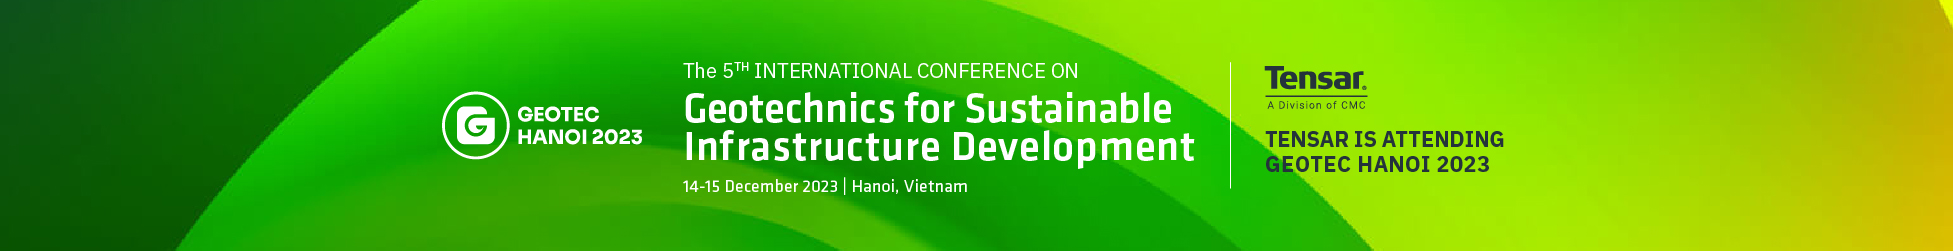 Image of The 5th International Conference on Geotechnics for Sustainable Infrastructure Development  (GEOTEC HANOI 2023)